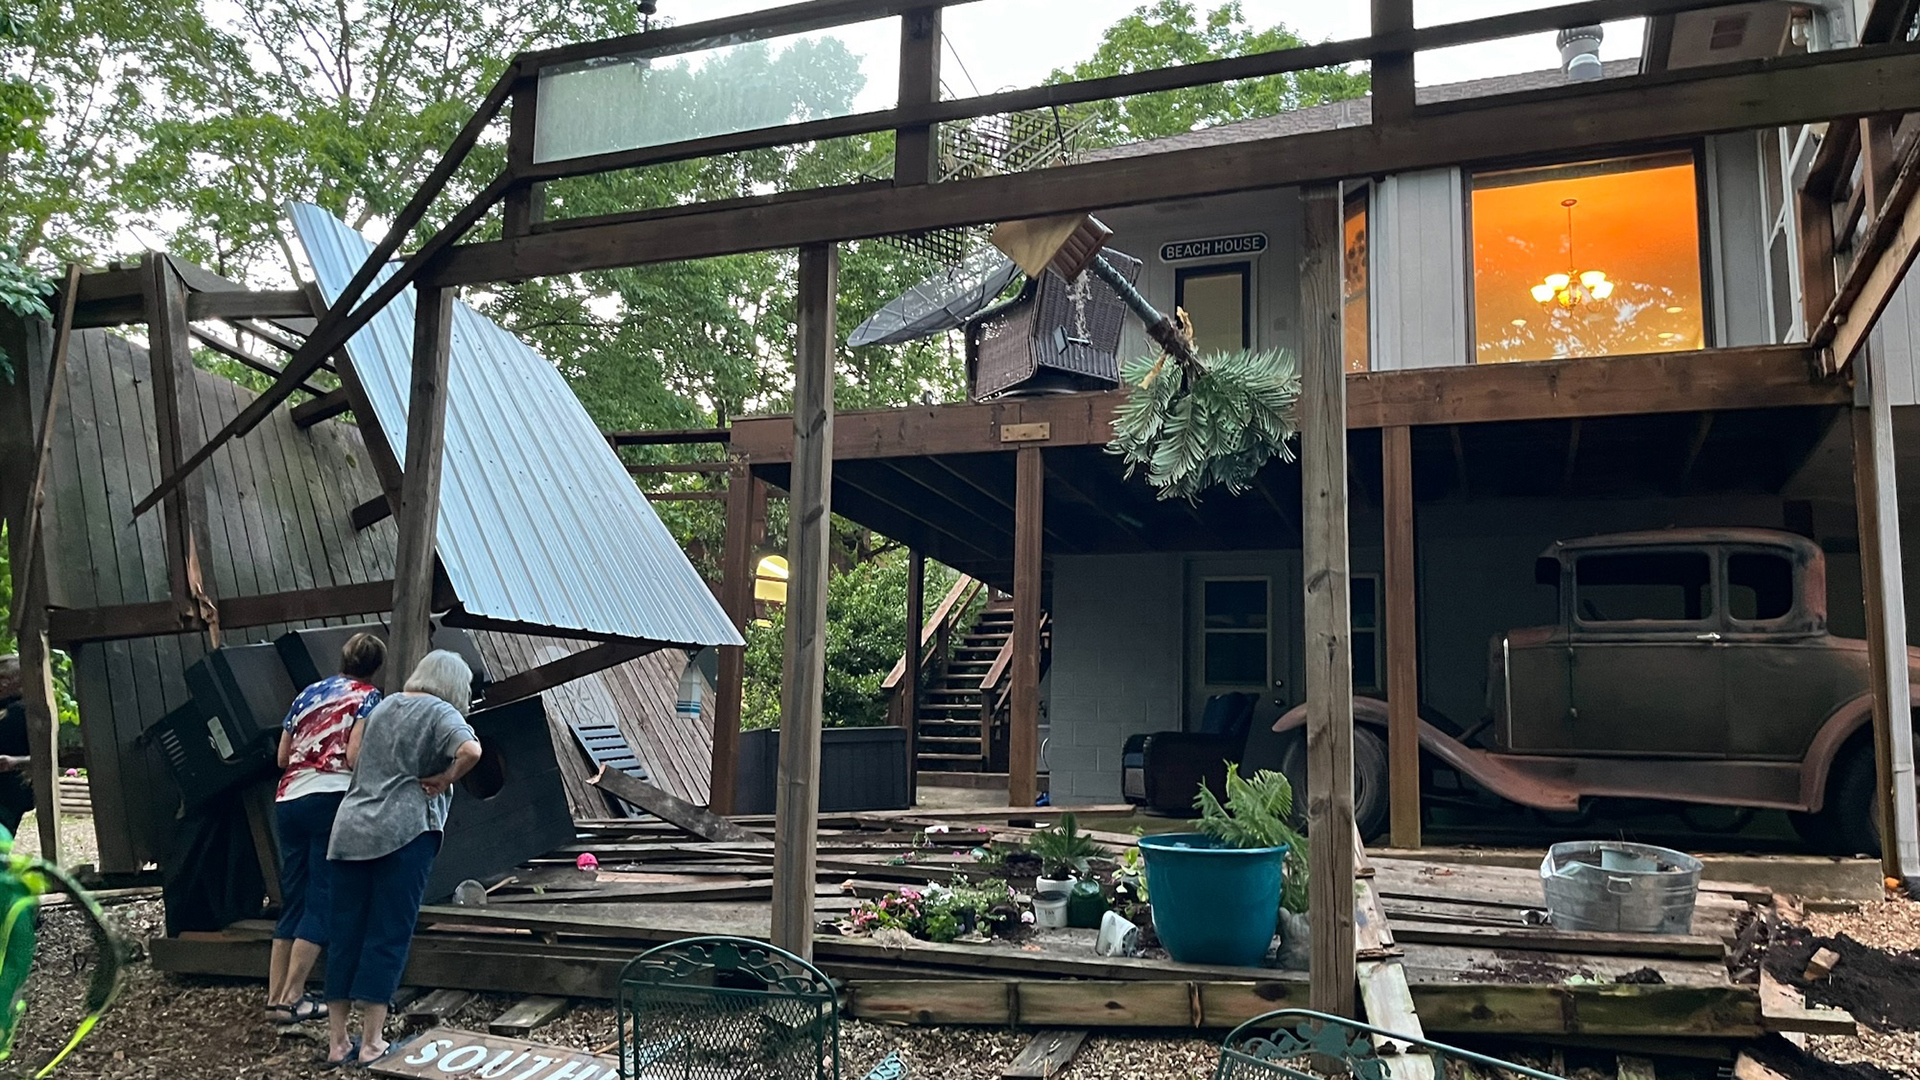 The deck, 12 to 15 feet off the ground, appeared to have collapsed from the weight, according to Cassi Lapp with the City of Bella Vista.